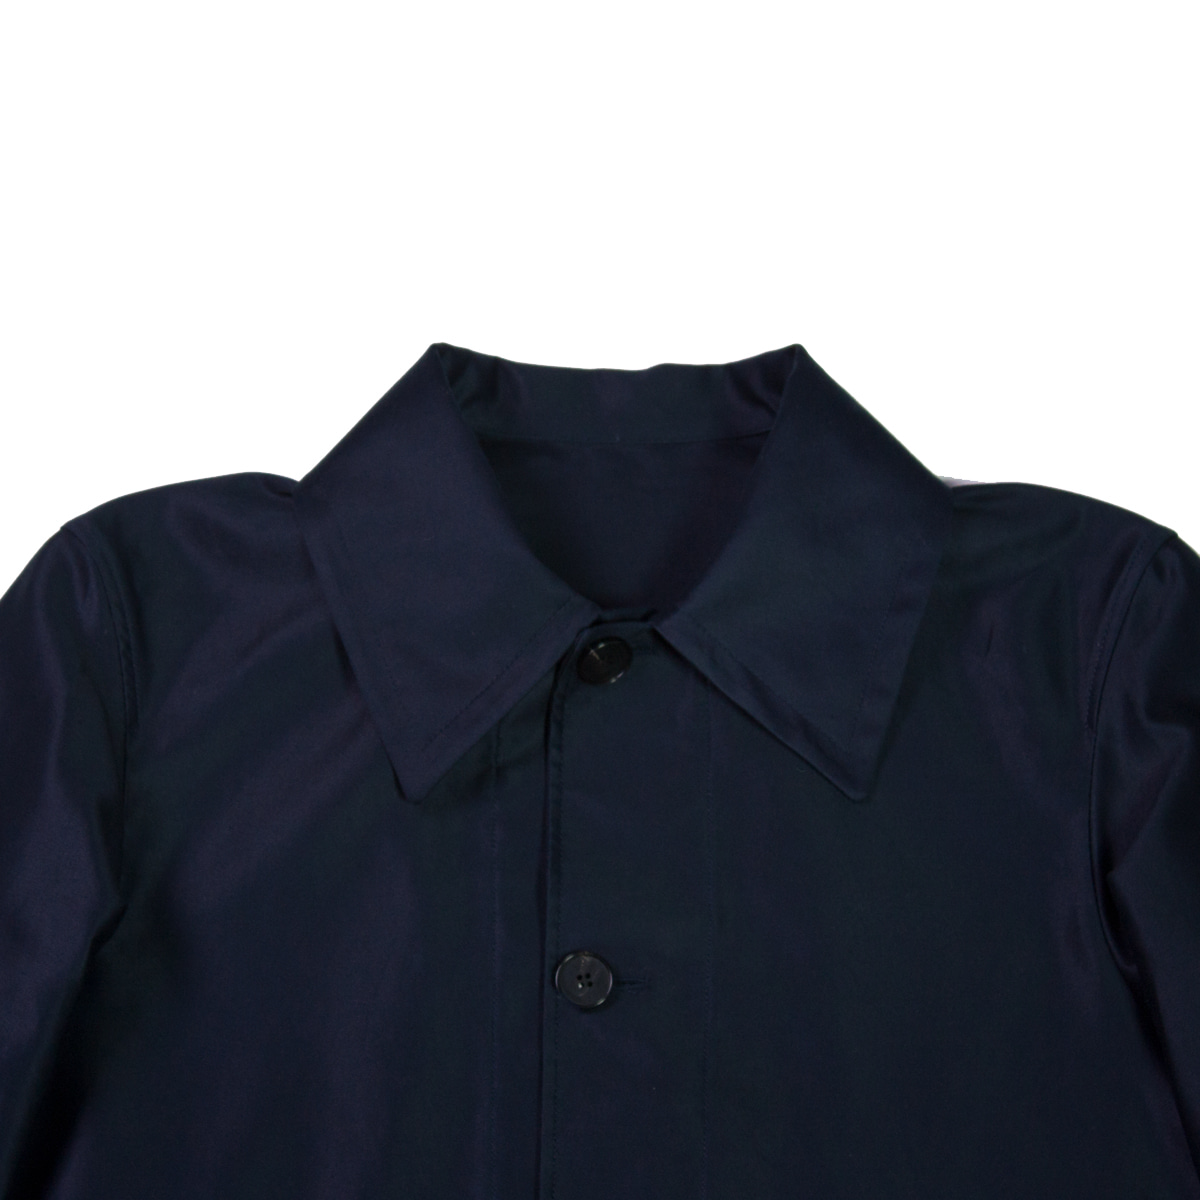 [ART IF ACTS] FIELD JACKET ‘NAVY’